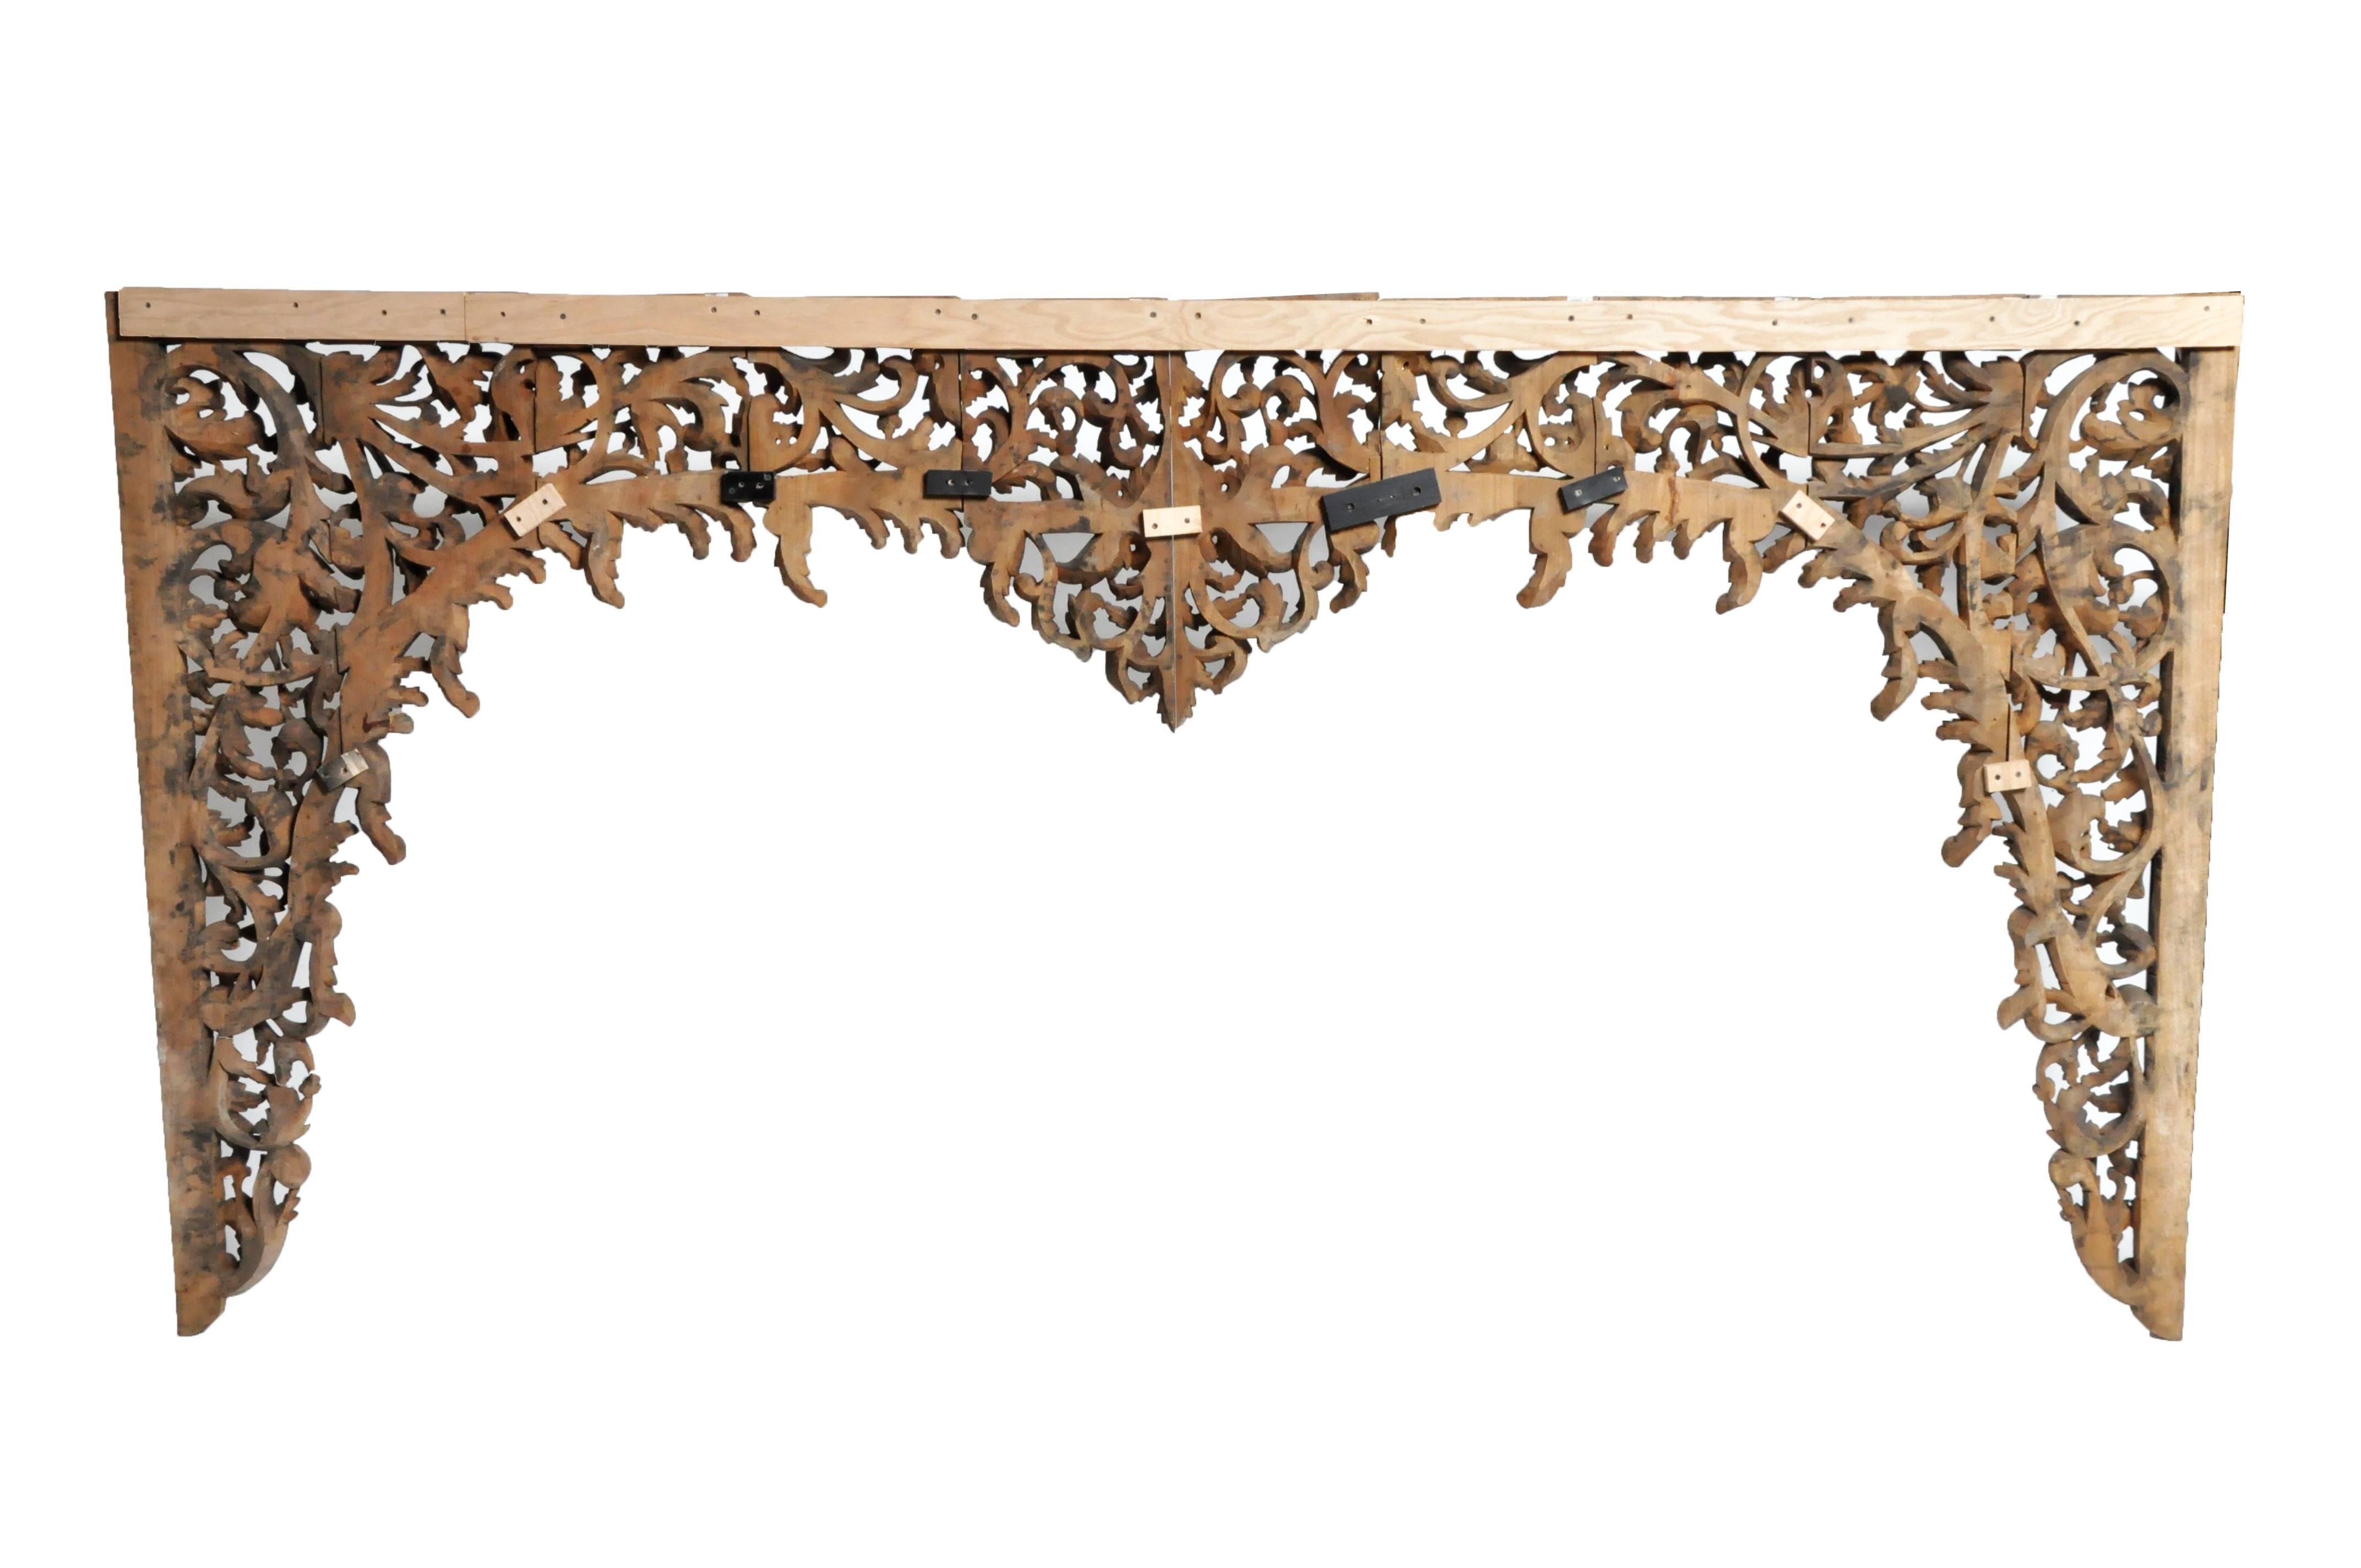 This hand carved Burmese arch was made from Teak wood. This impressive decoration features vine and floral motifs and were made according to post.